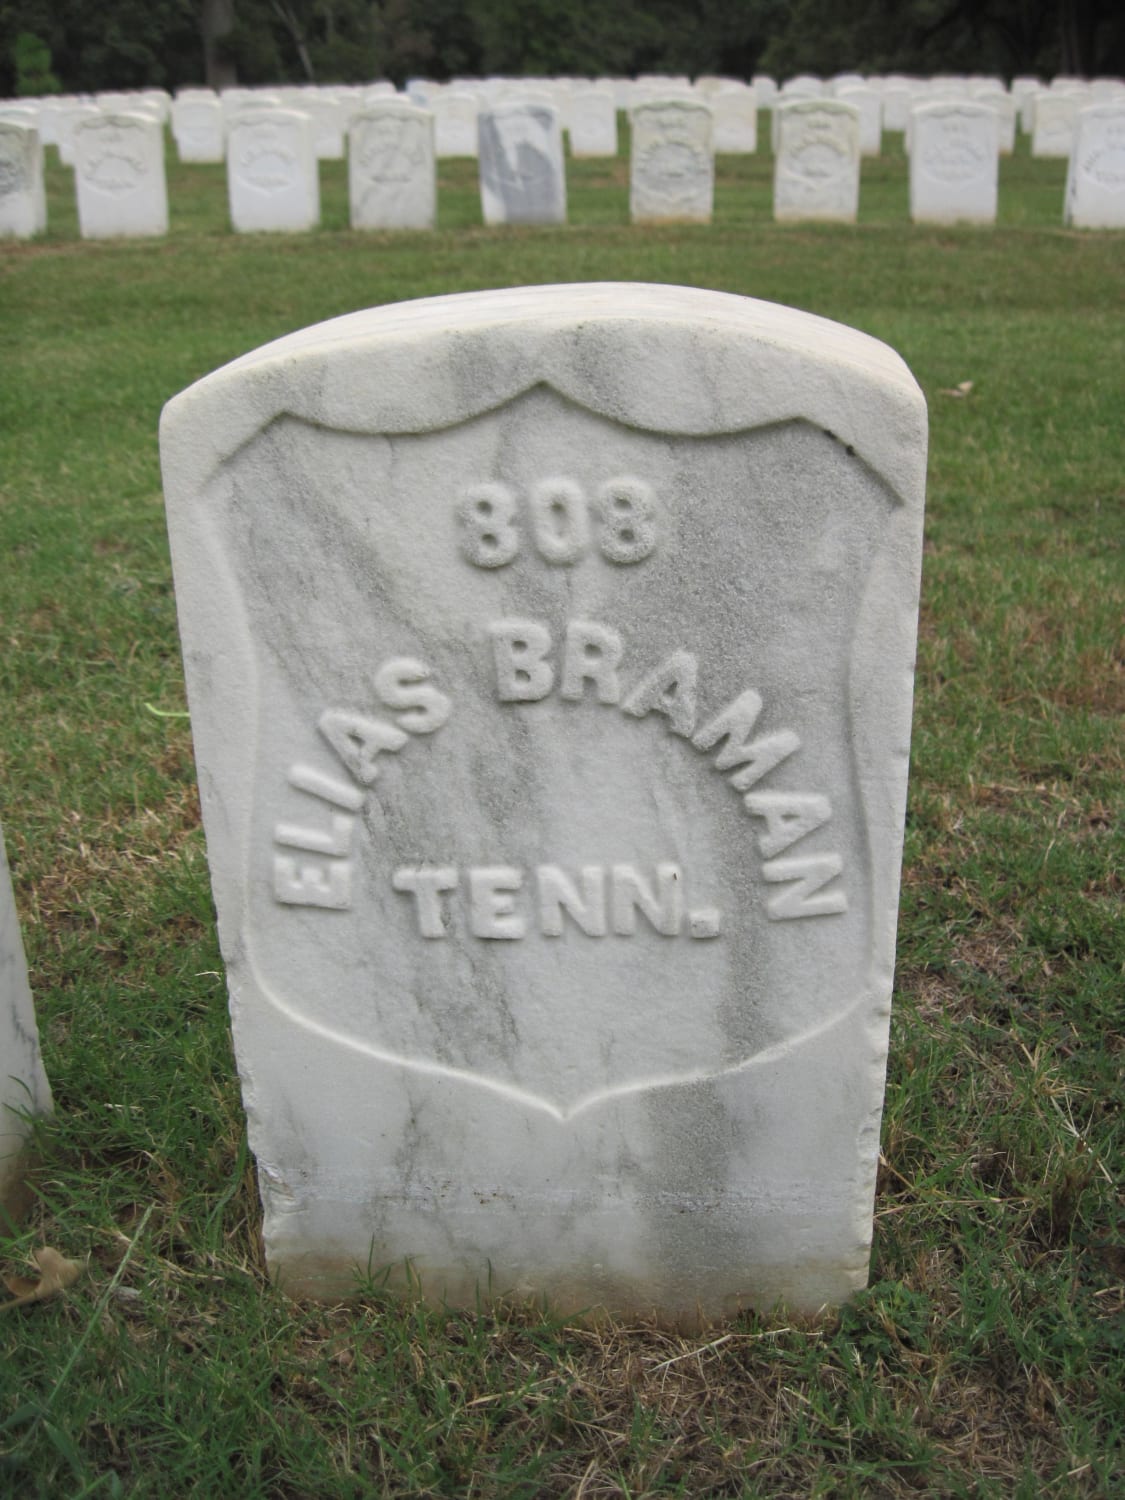 My Great Great Grandfathers grave at Andersonville Prison Cemetery. He was a Union Soldier from East Tennessee who was captured along with his two brothers. They all died in the spring of 1864 from dysentery.